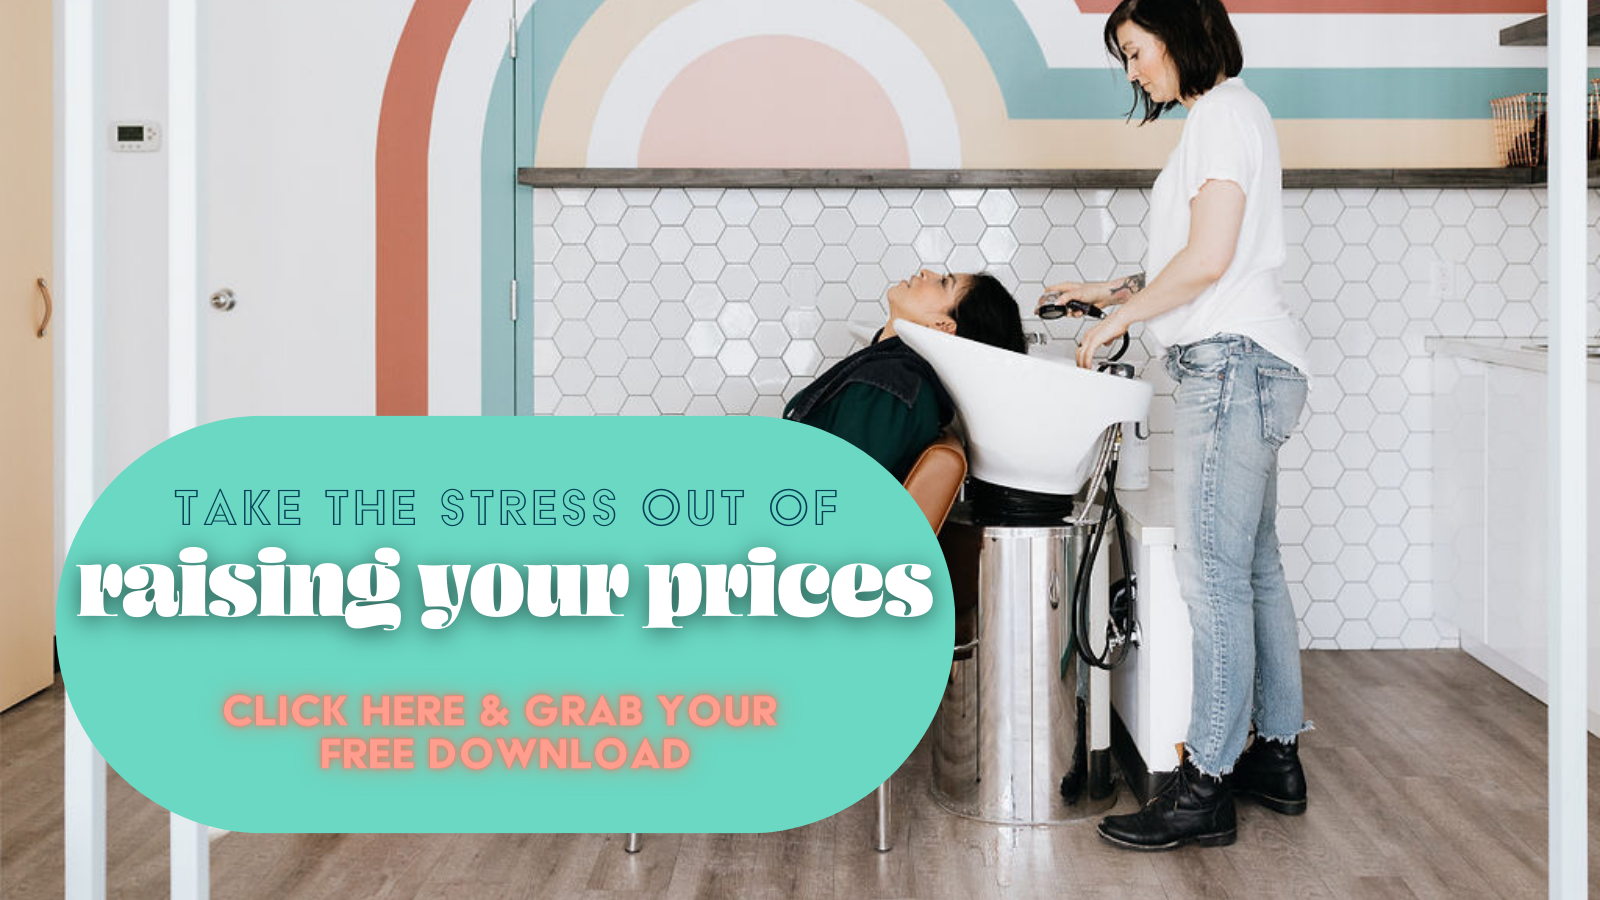 Dawn stands at a salon sink wearing blue jeans and a ripped t-shirt as she washes her clients hair who is leaning back in the sink. Text overlay reads "Take the stress out of raising your prices click here and grab your free download"